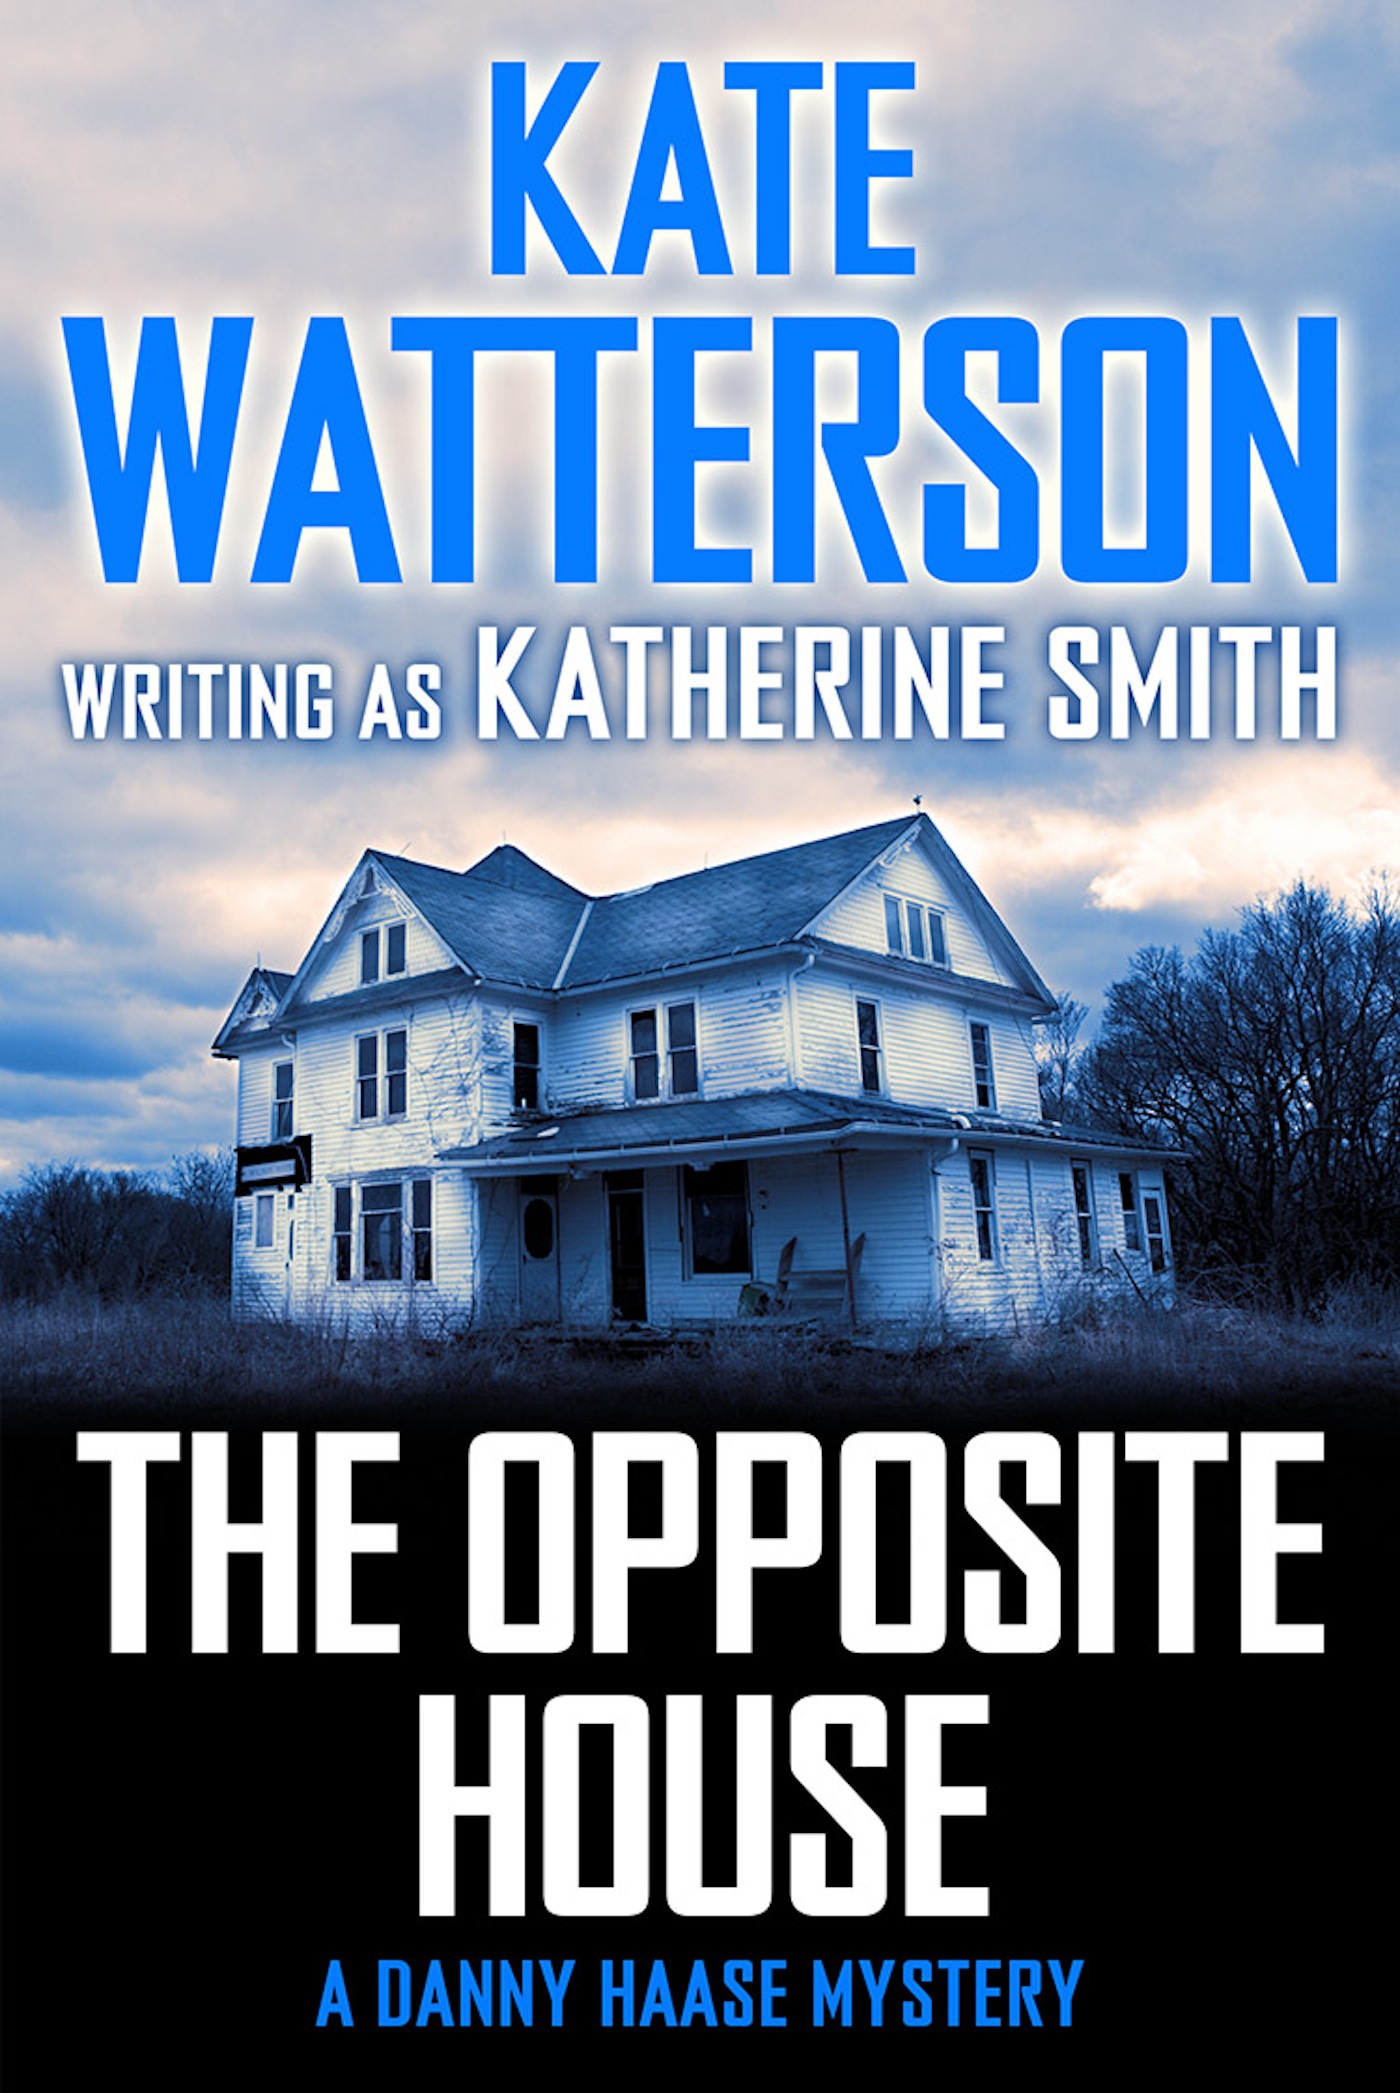 The Opposite House : A Danny Haase Mystery by Kate Watterson